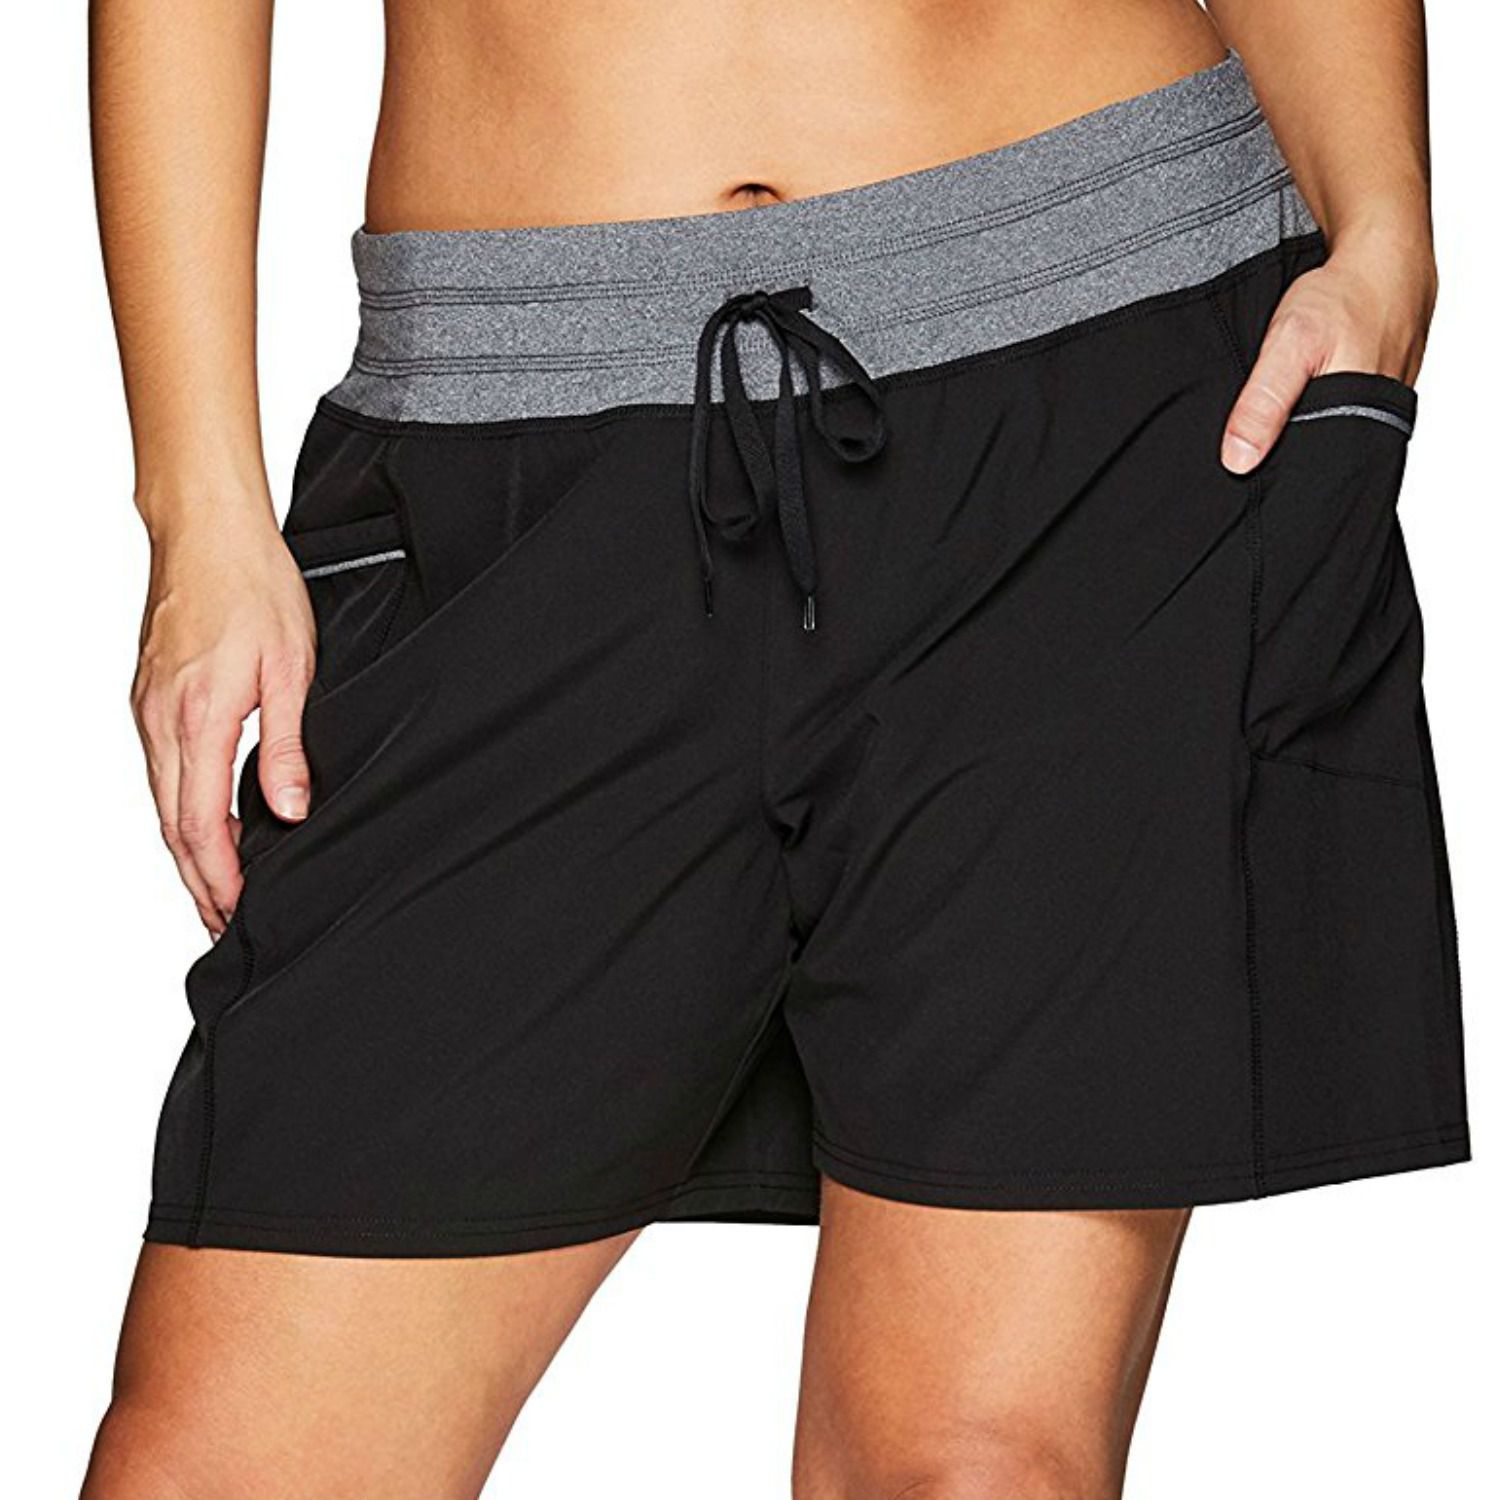 short shorts with pockets hanging out